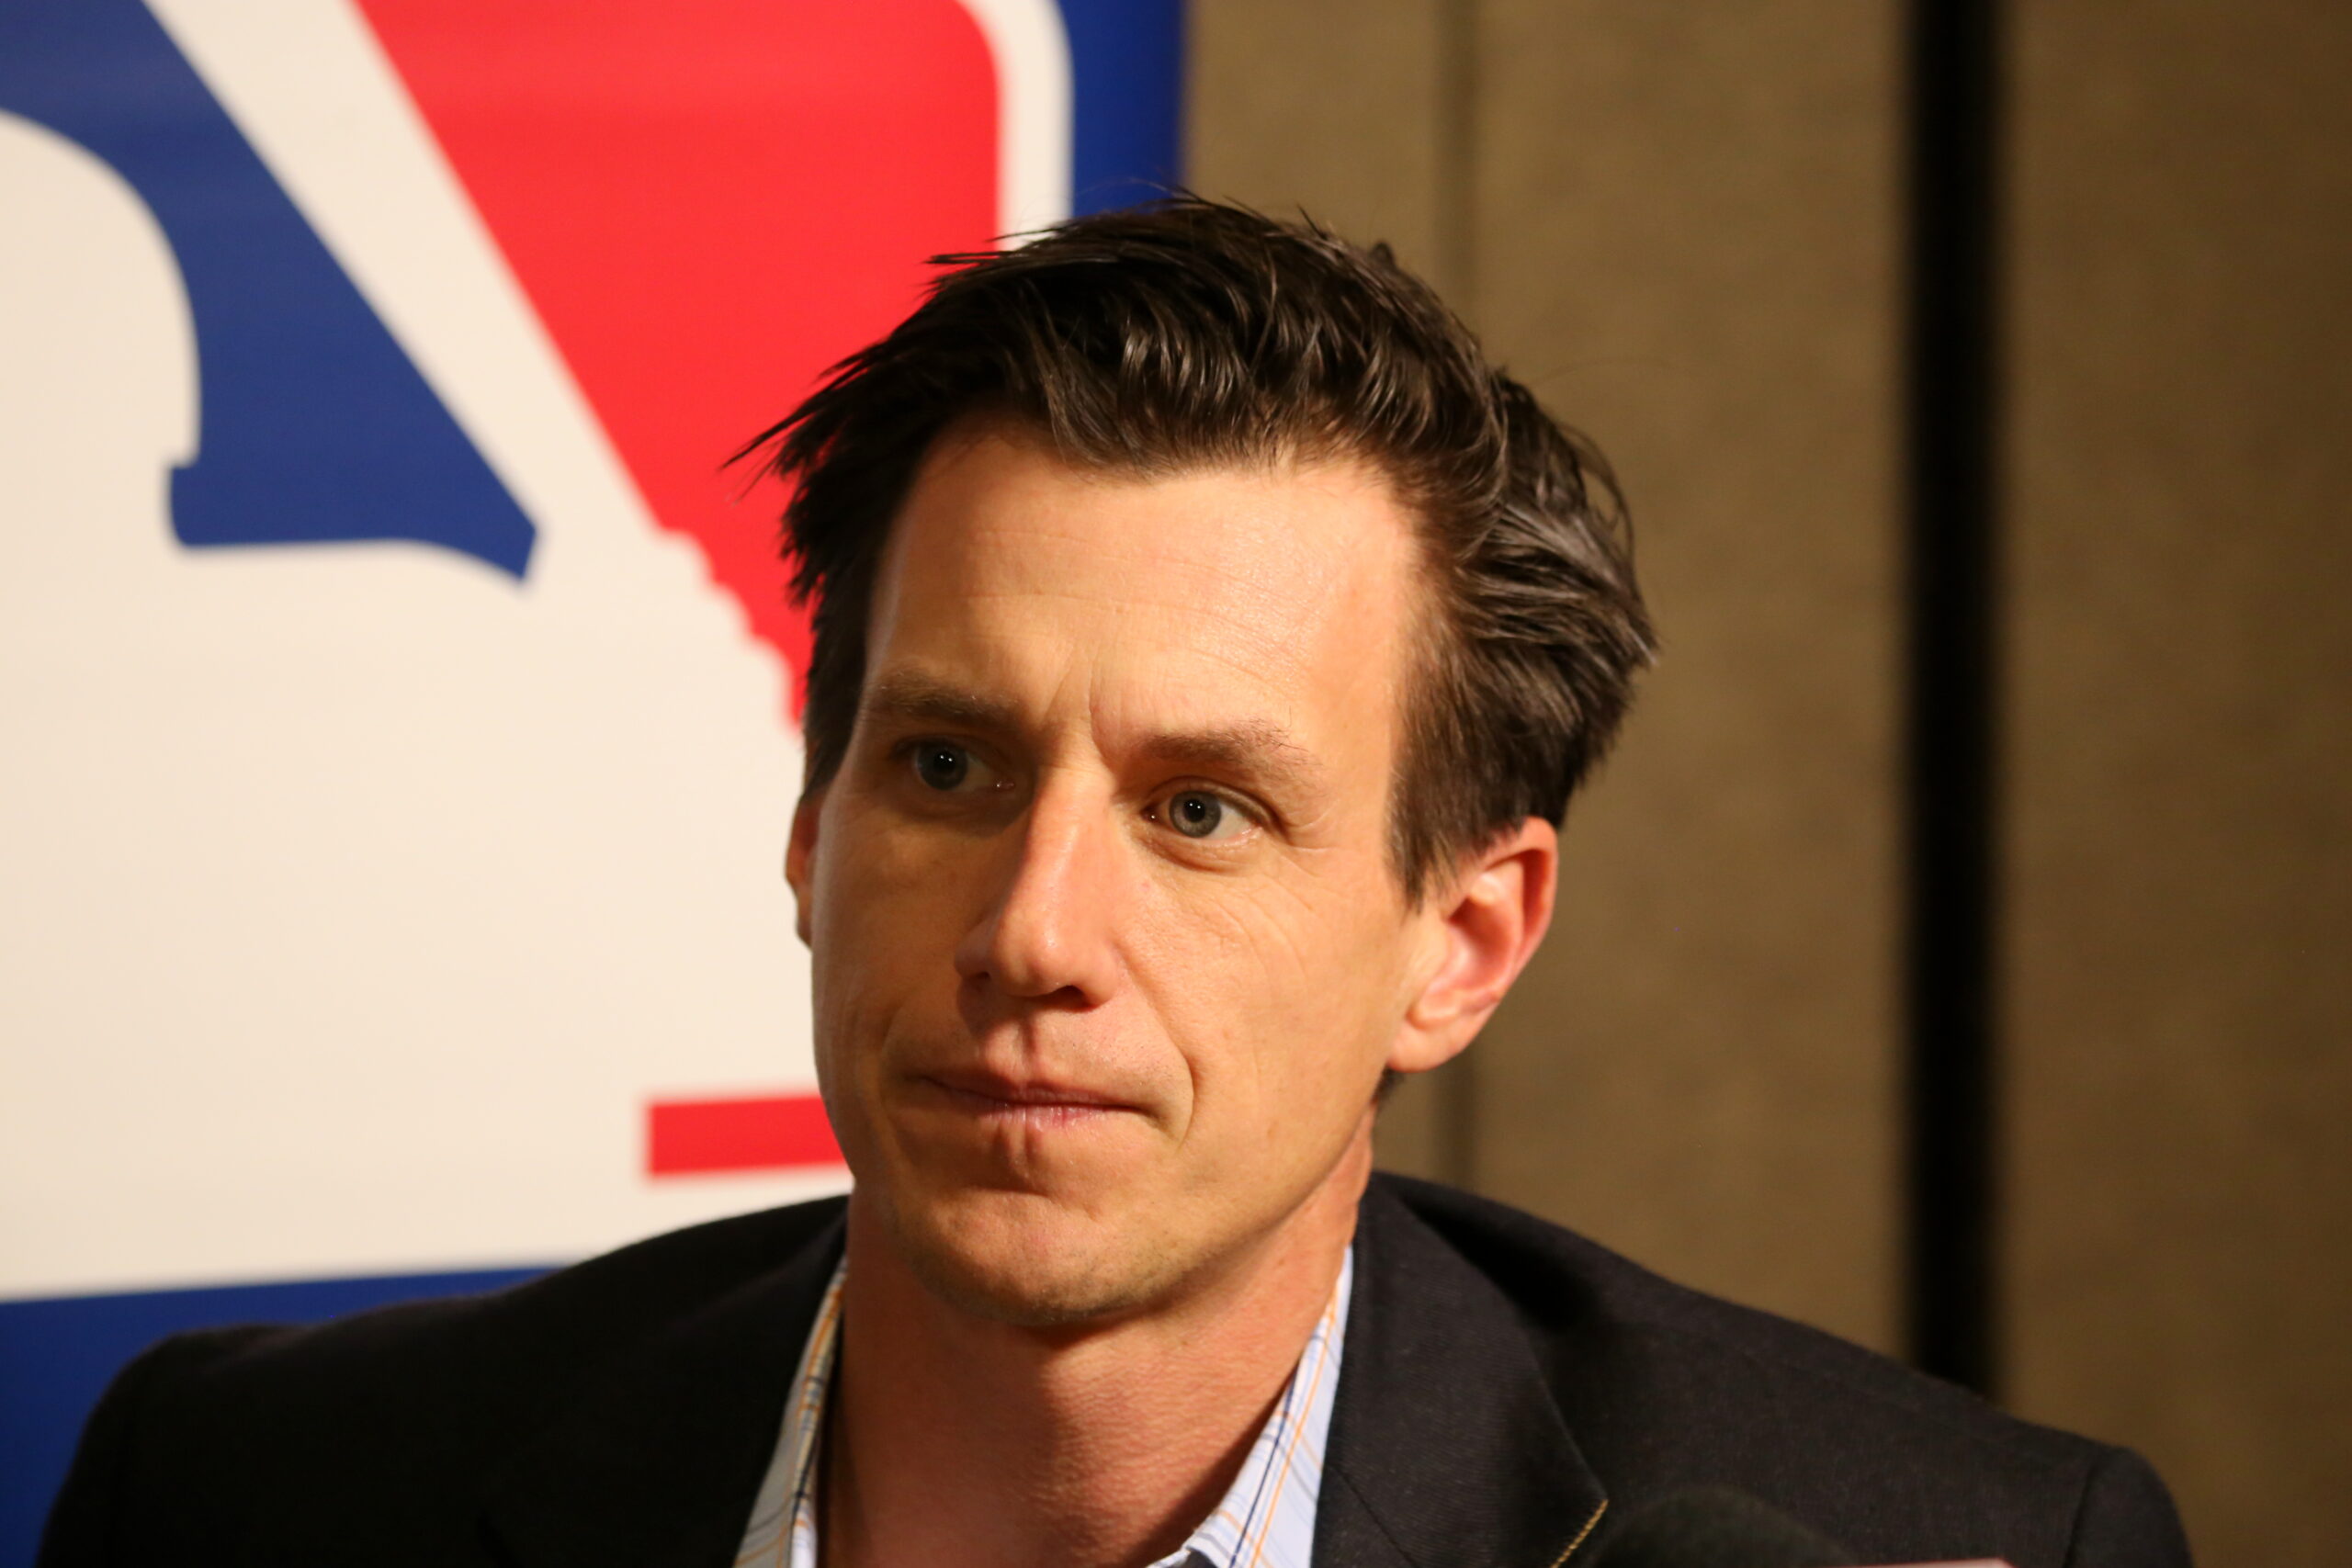 Brewers manager Craig Counsell talks to reporters at the #WinterMeetings.